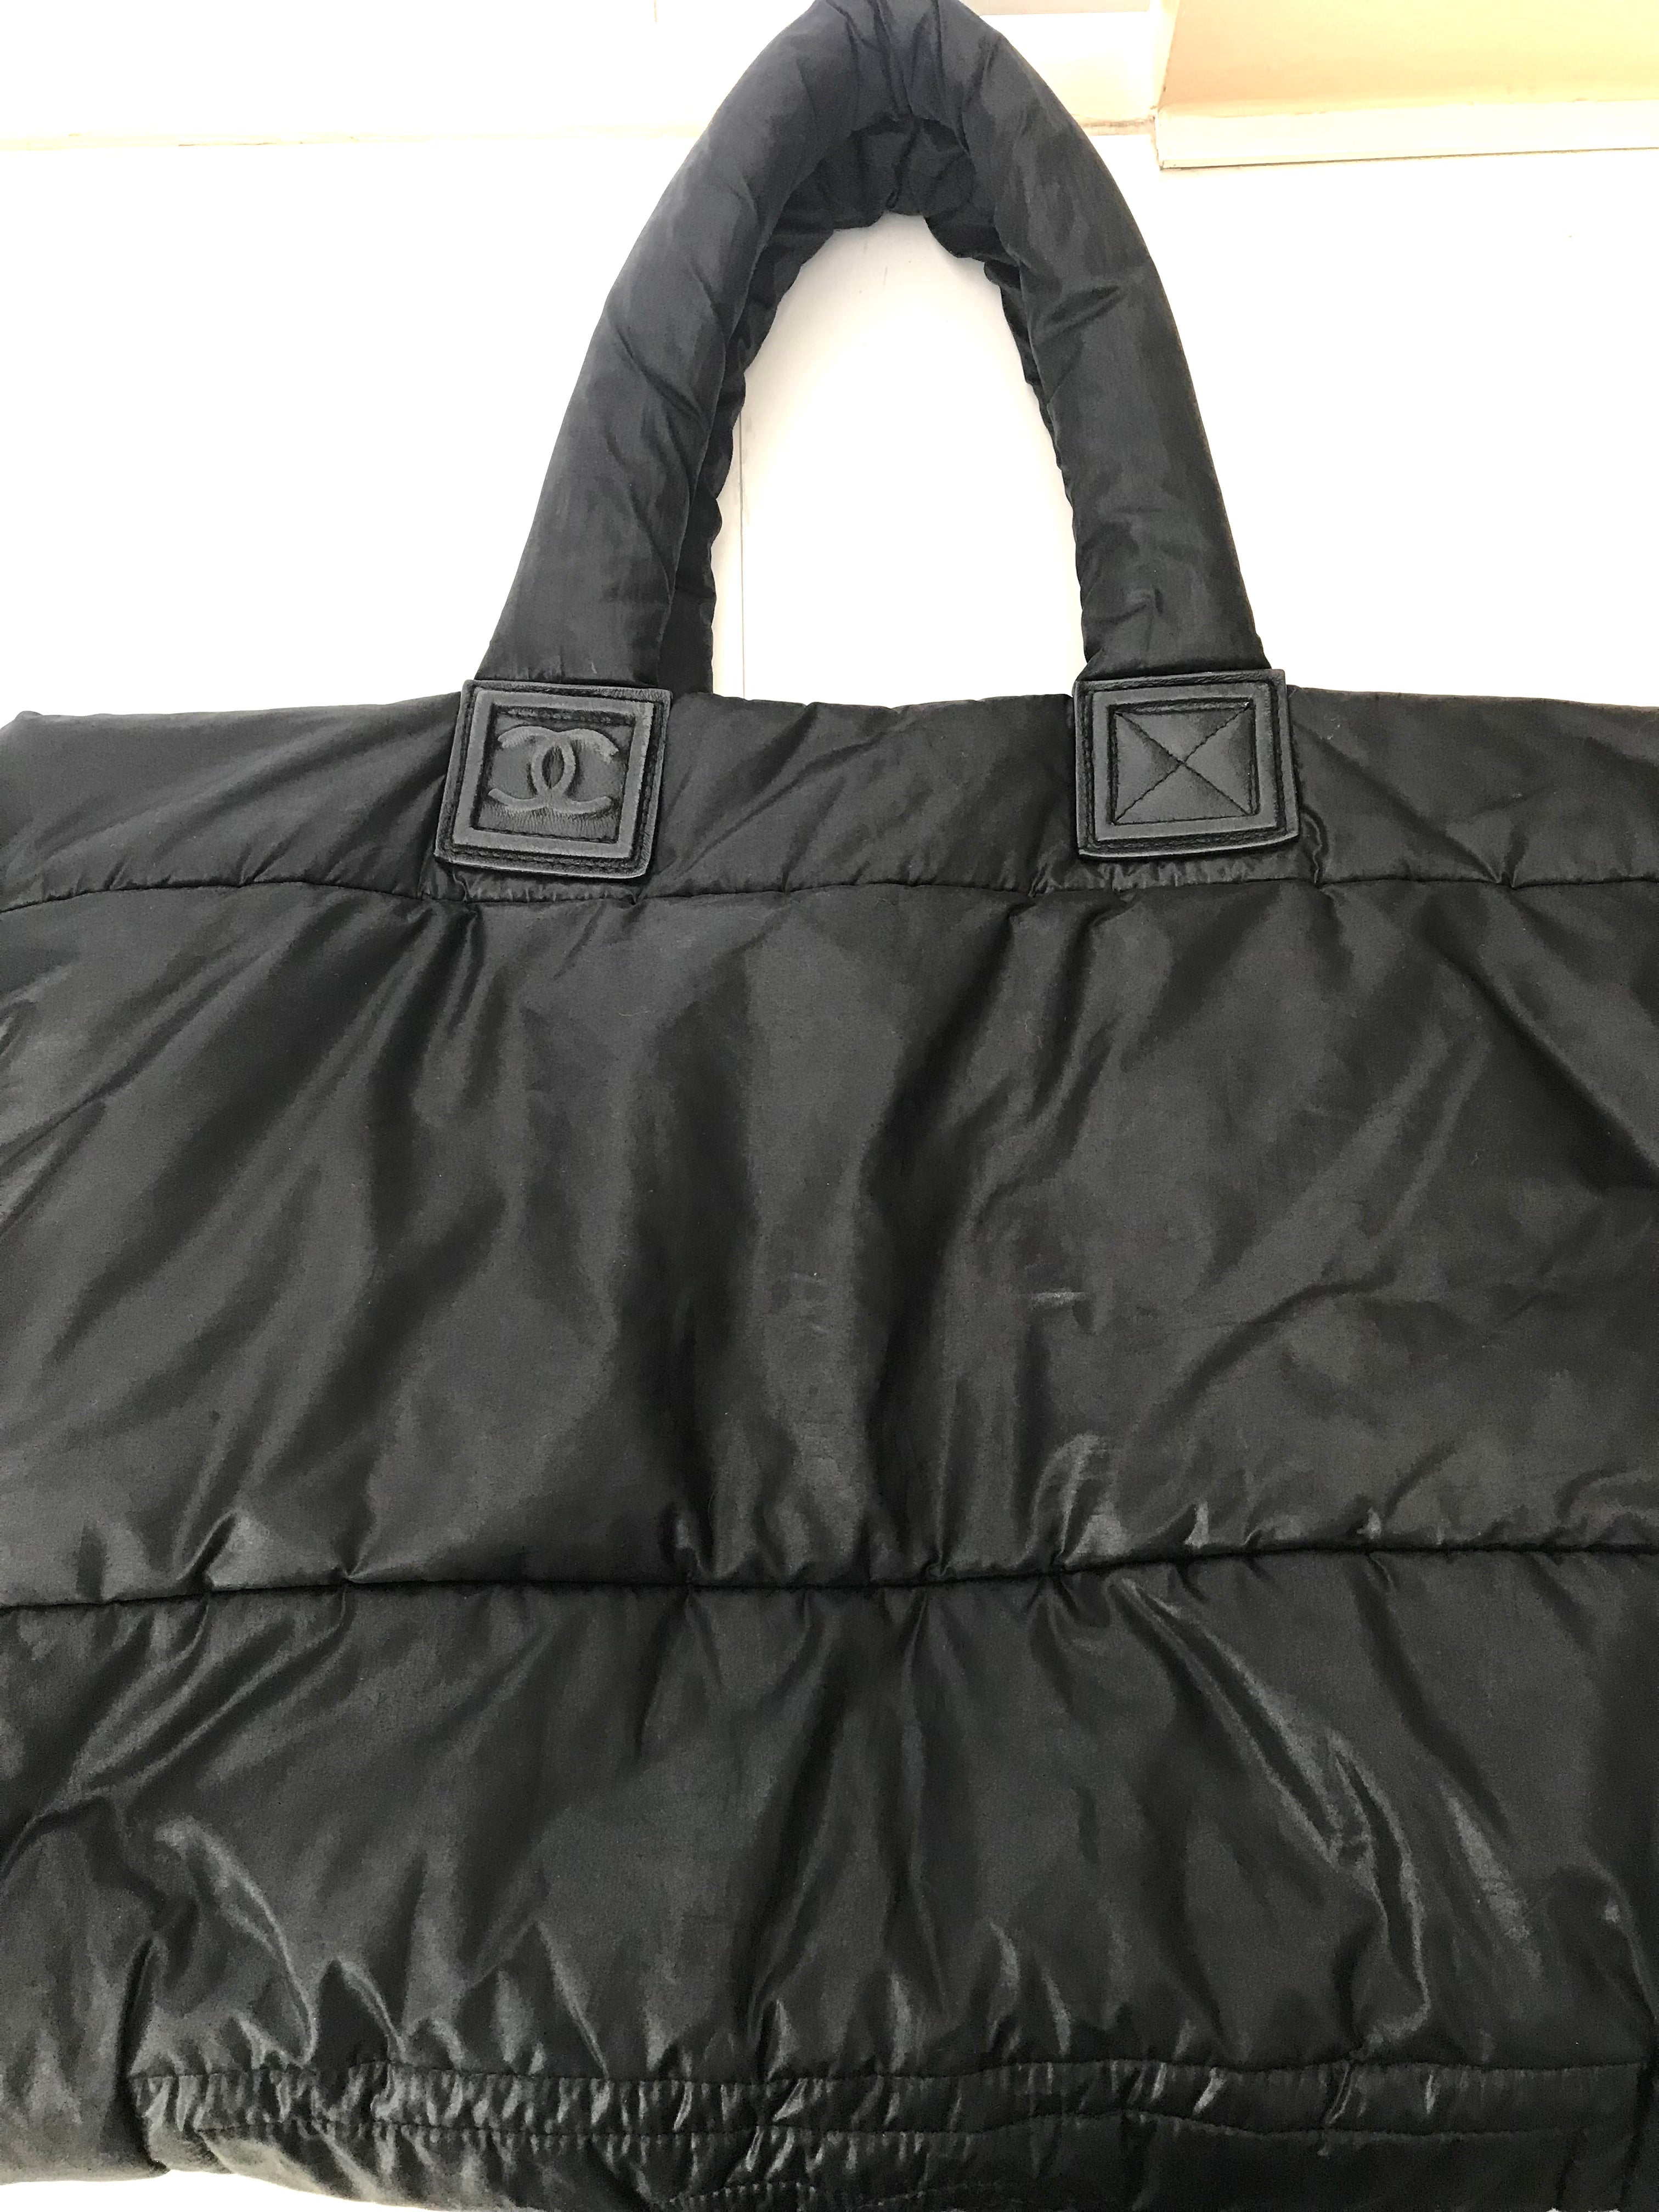 CHANEL Coco Cocoon PM Black Soft Leather Tote Handbag w. Authenticity Card